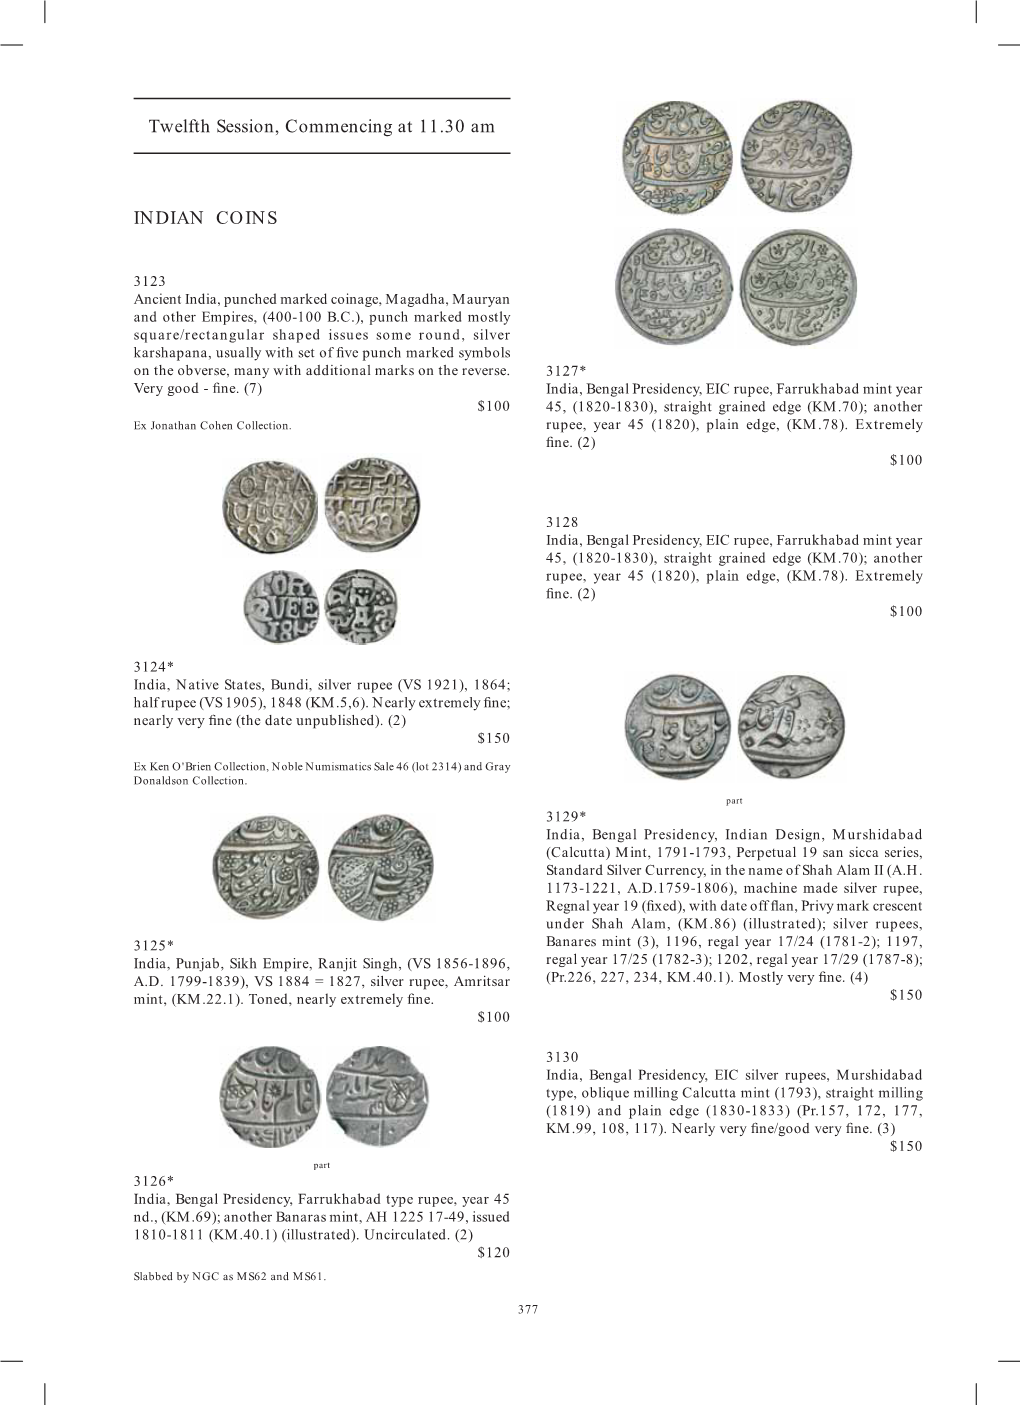 Twelfth Session, Commencing at 11.30 Am INDIAN COINS